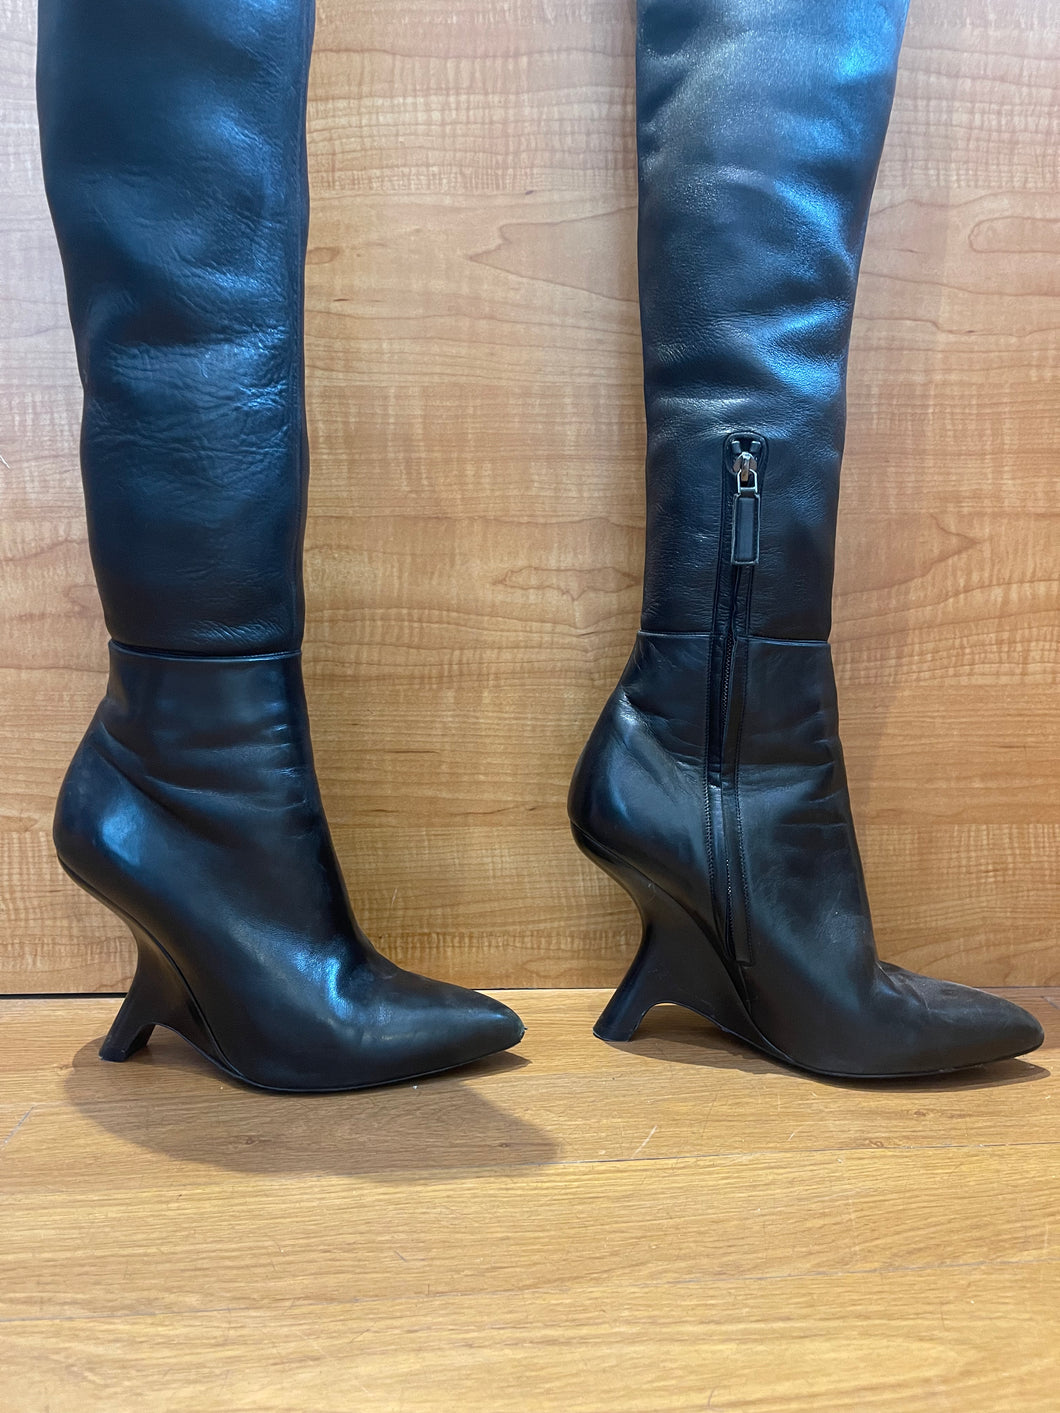 Tom Ford Thigh High Wedge Boots Size 9